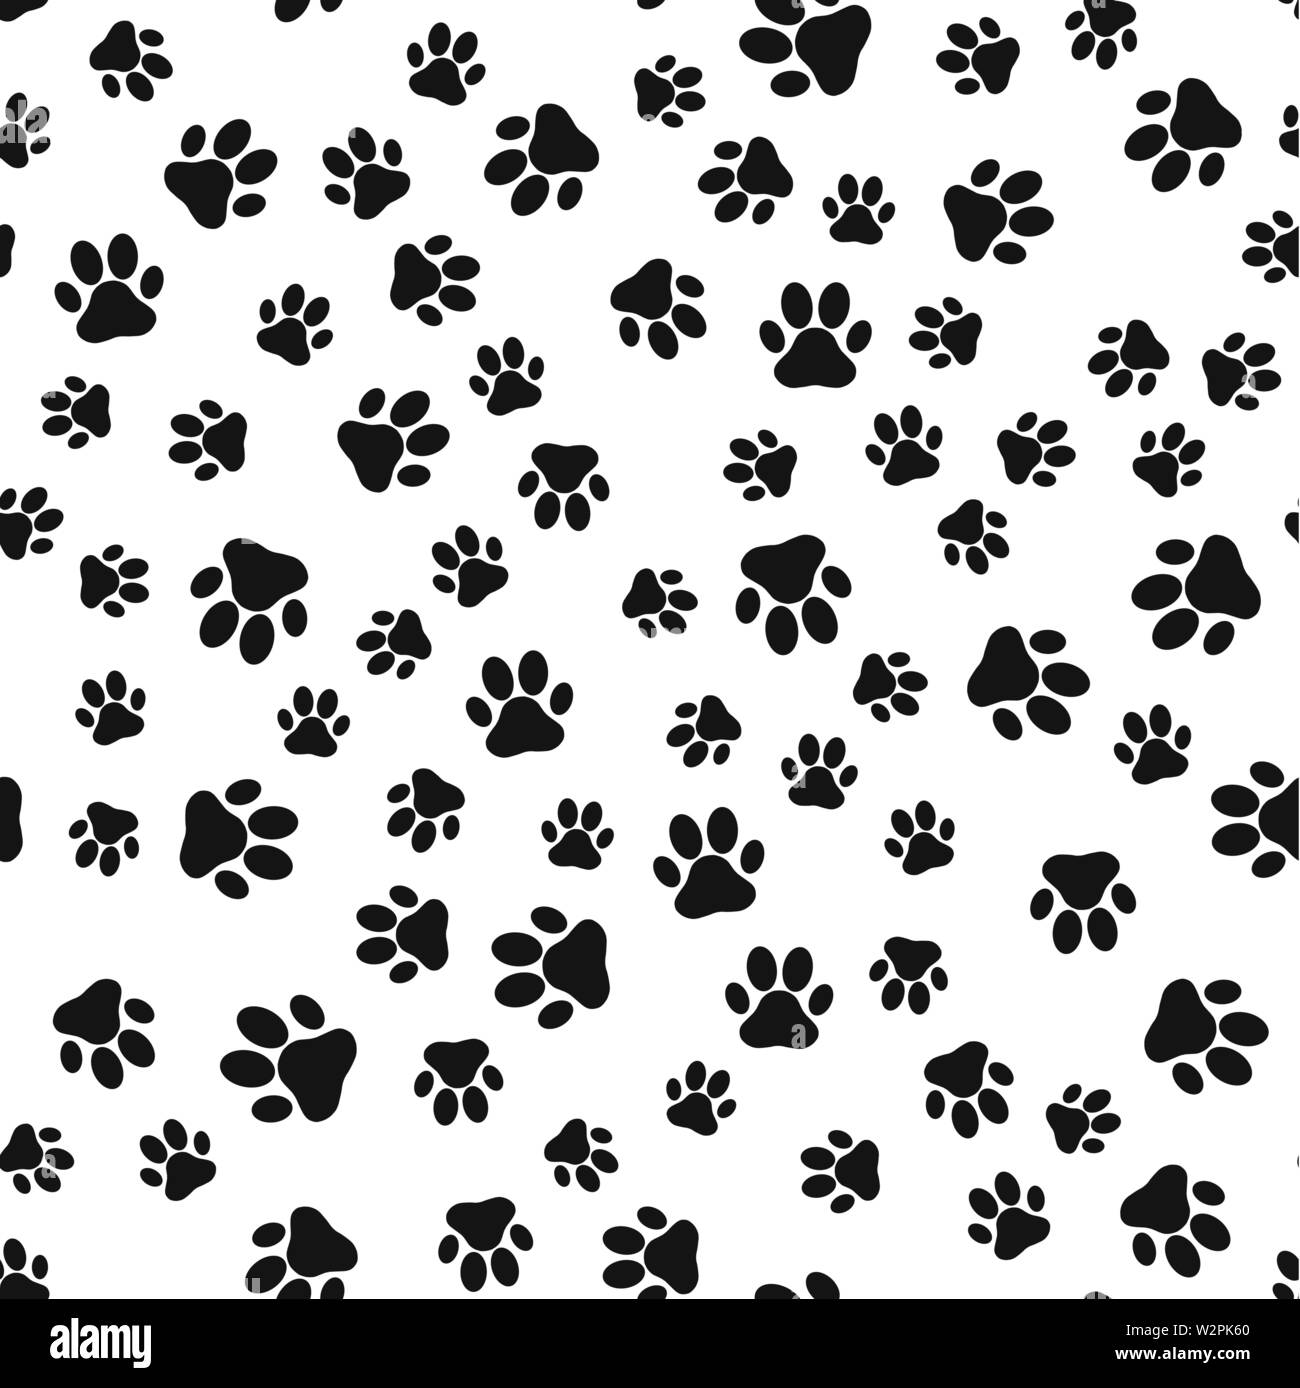 Dog paw print pattern seamless on white background Stock Vector Image